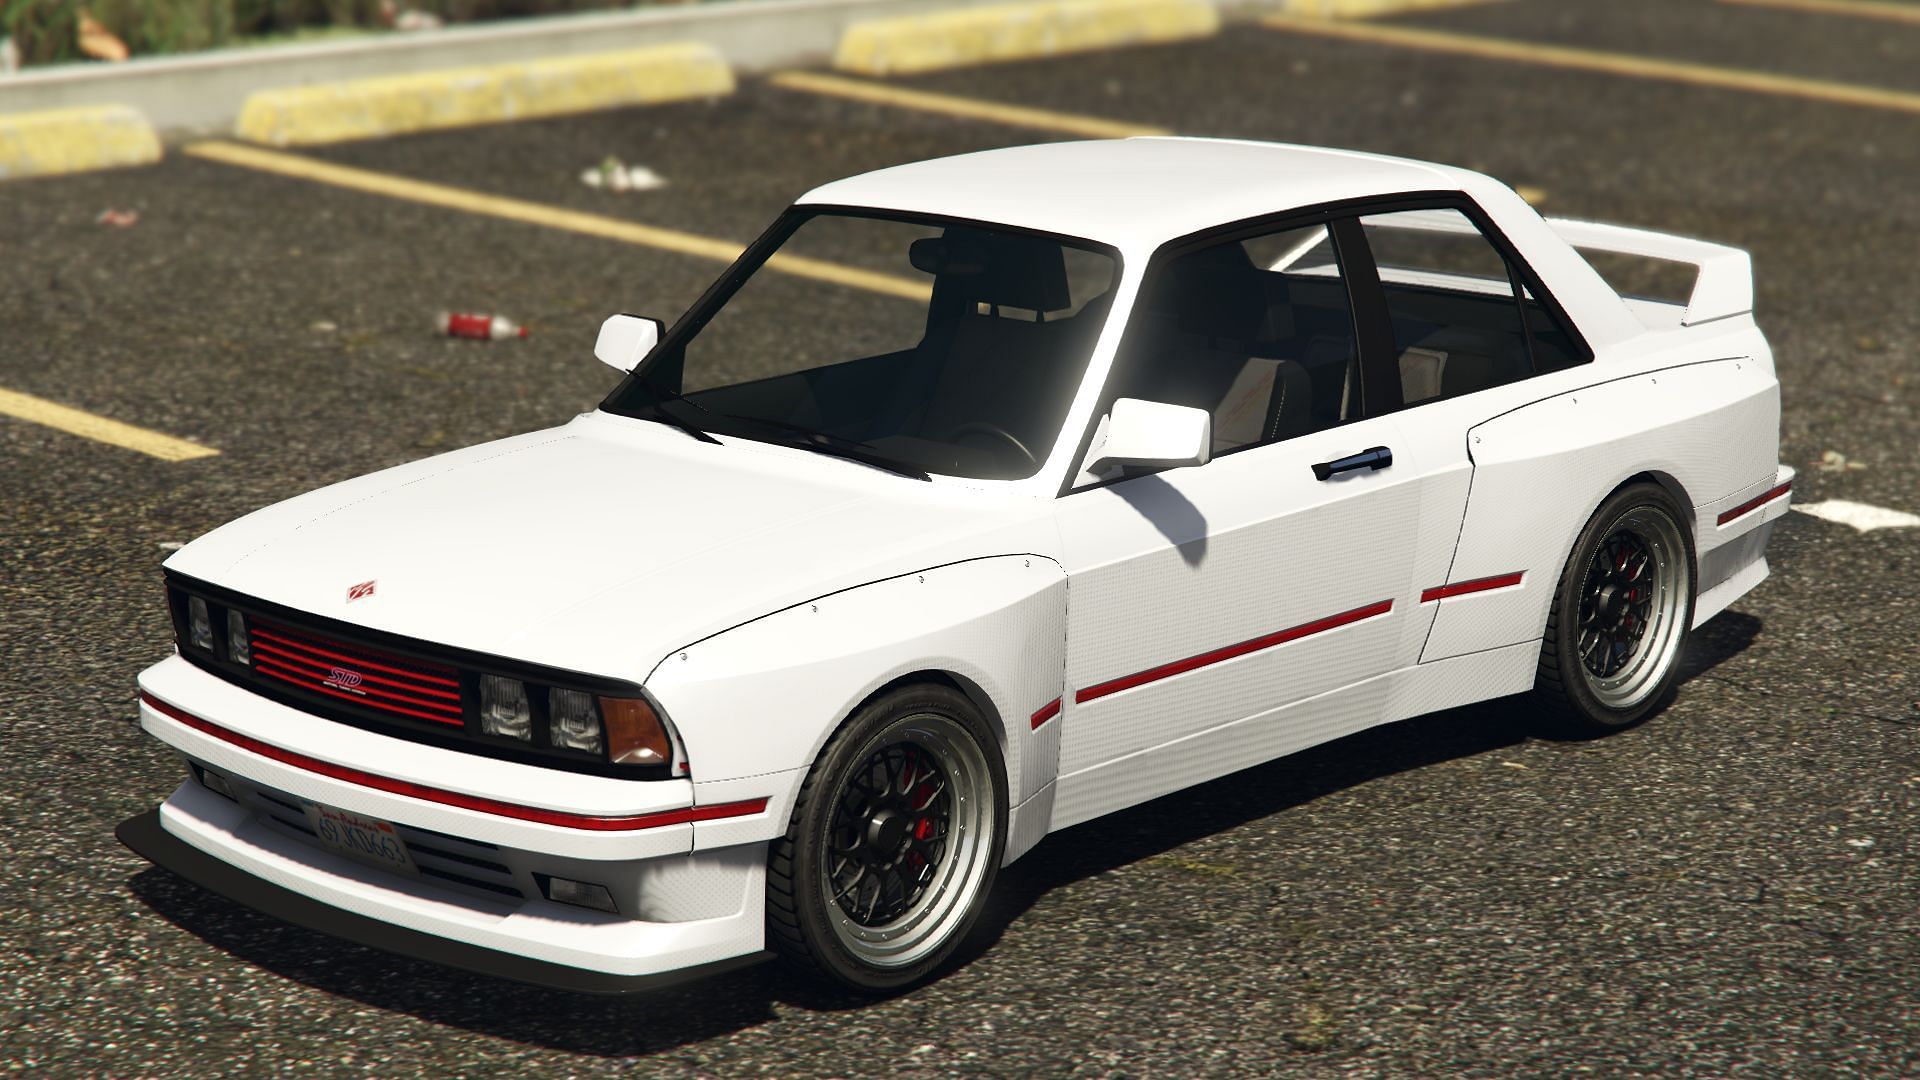 The Sentinel Classic Widebody in Grand Theft Auto Online (Image via Rockstar Games)